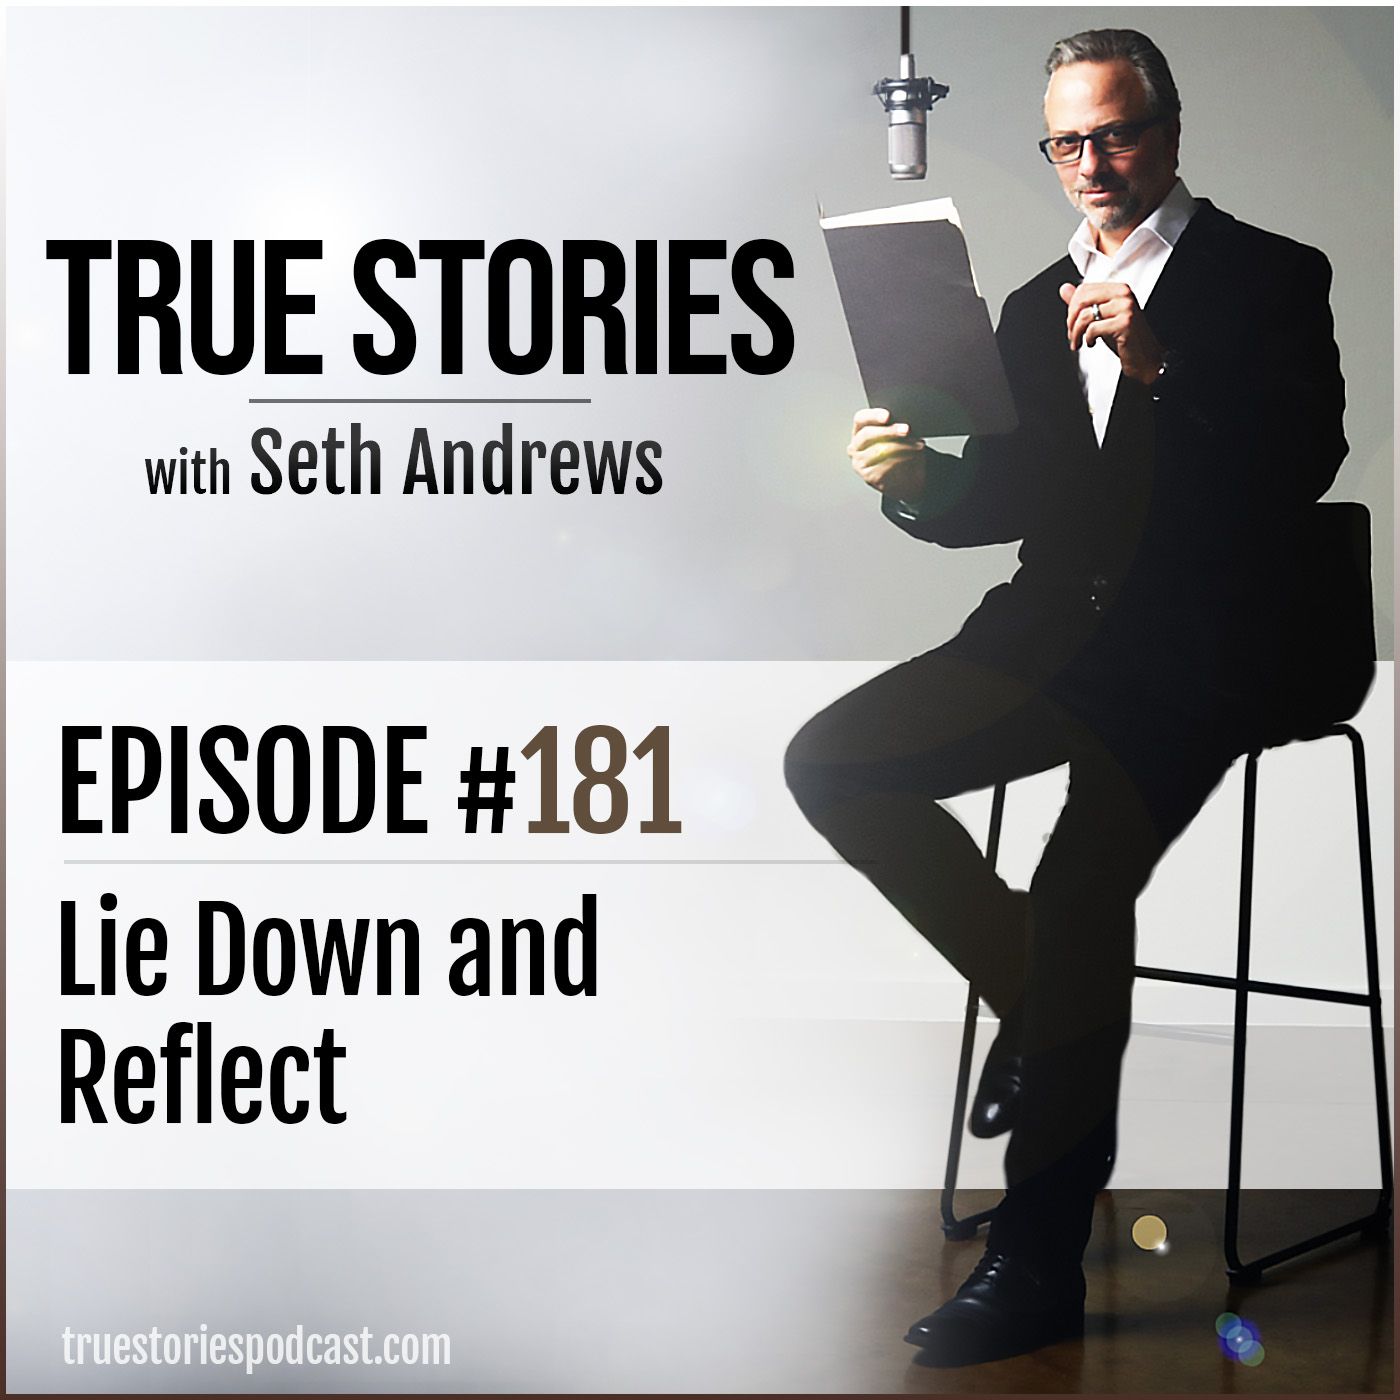 True Stories #181 - Lie Down and Reflect